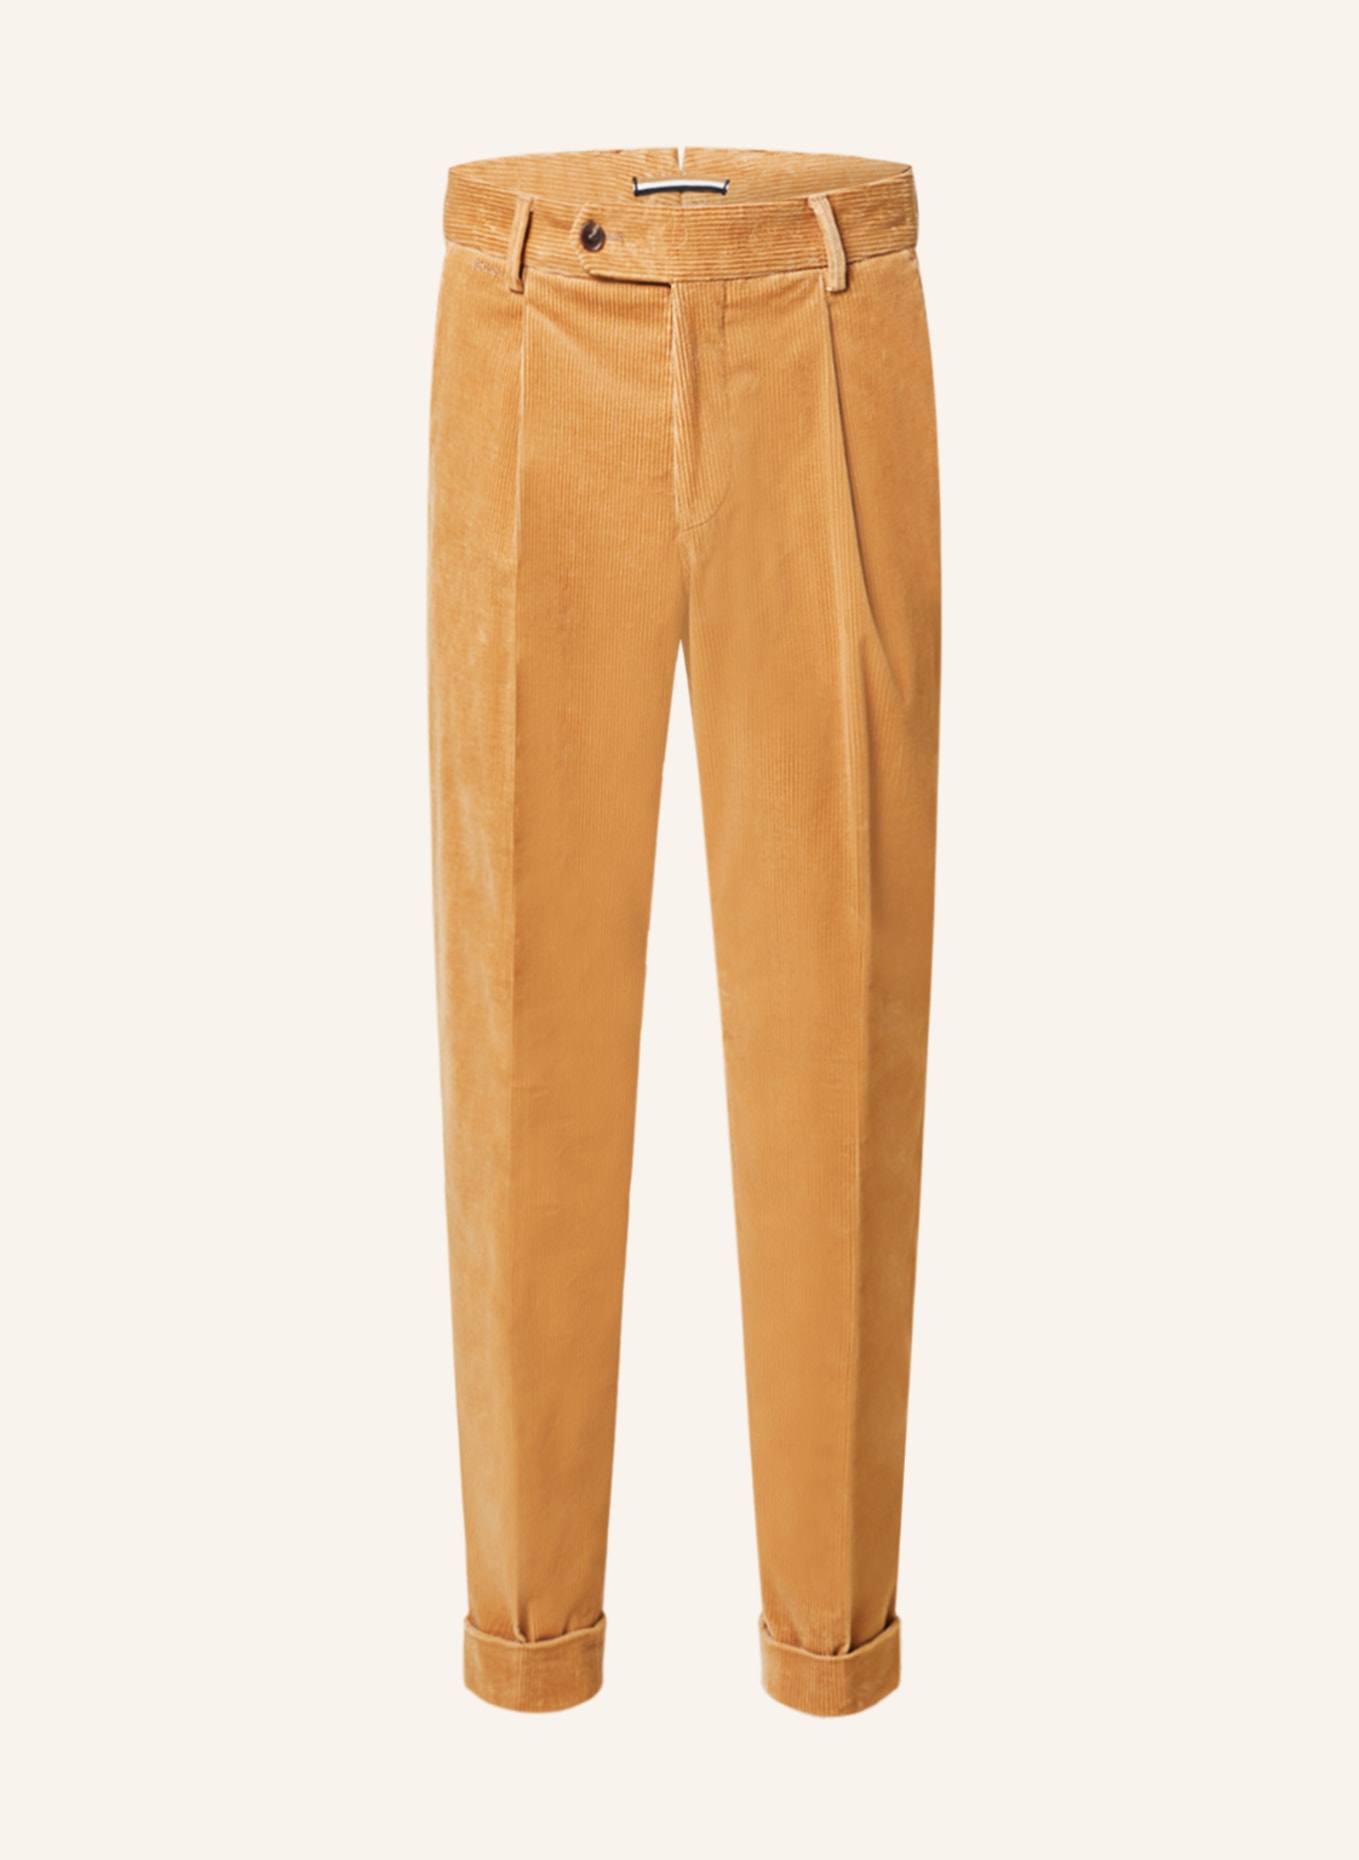 BOSS Cordhose H-PERIN Relaxed Fit, Farbe: CAMEL (Bild 1)